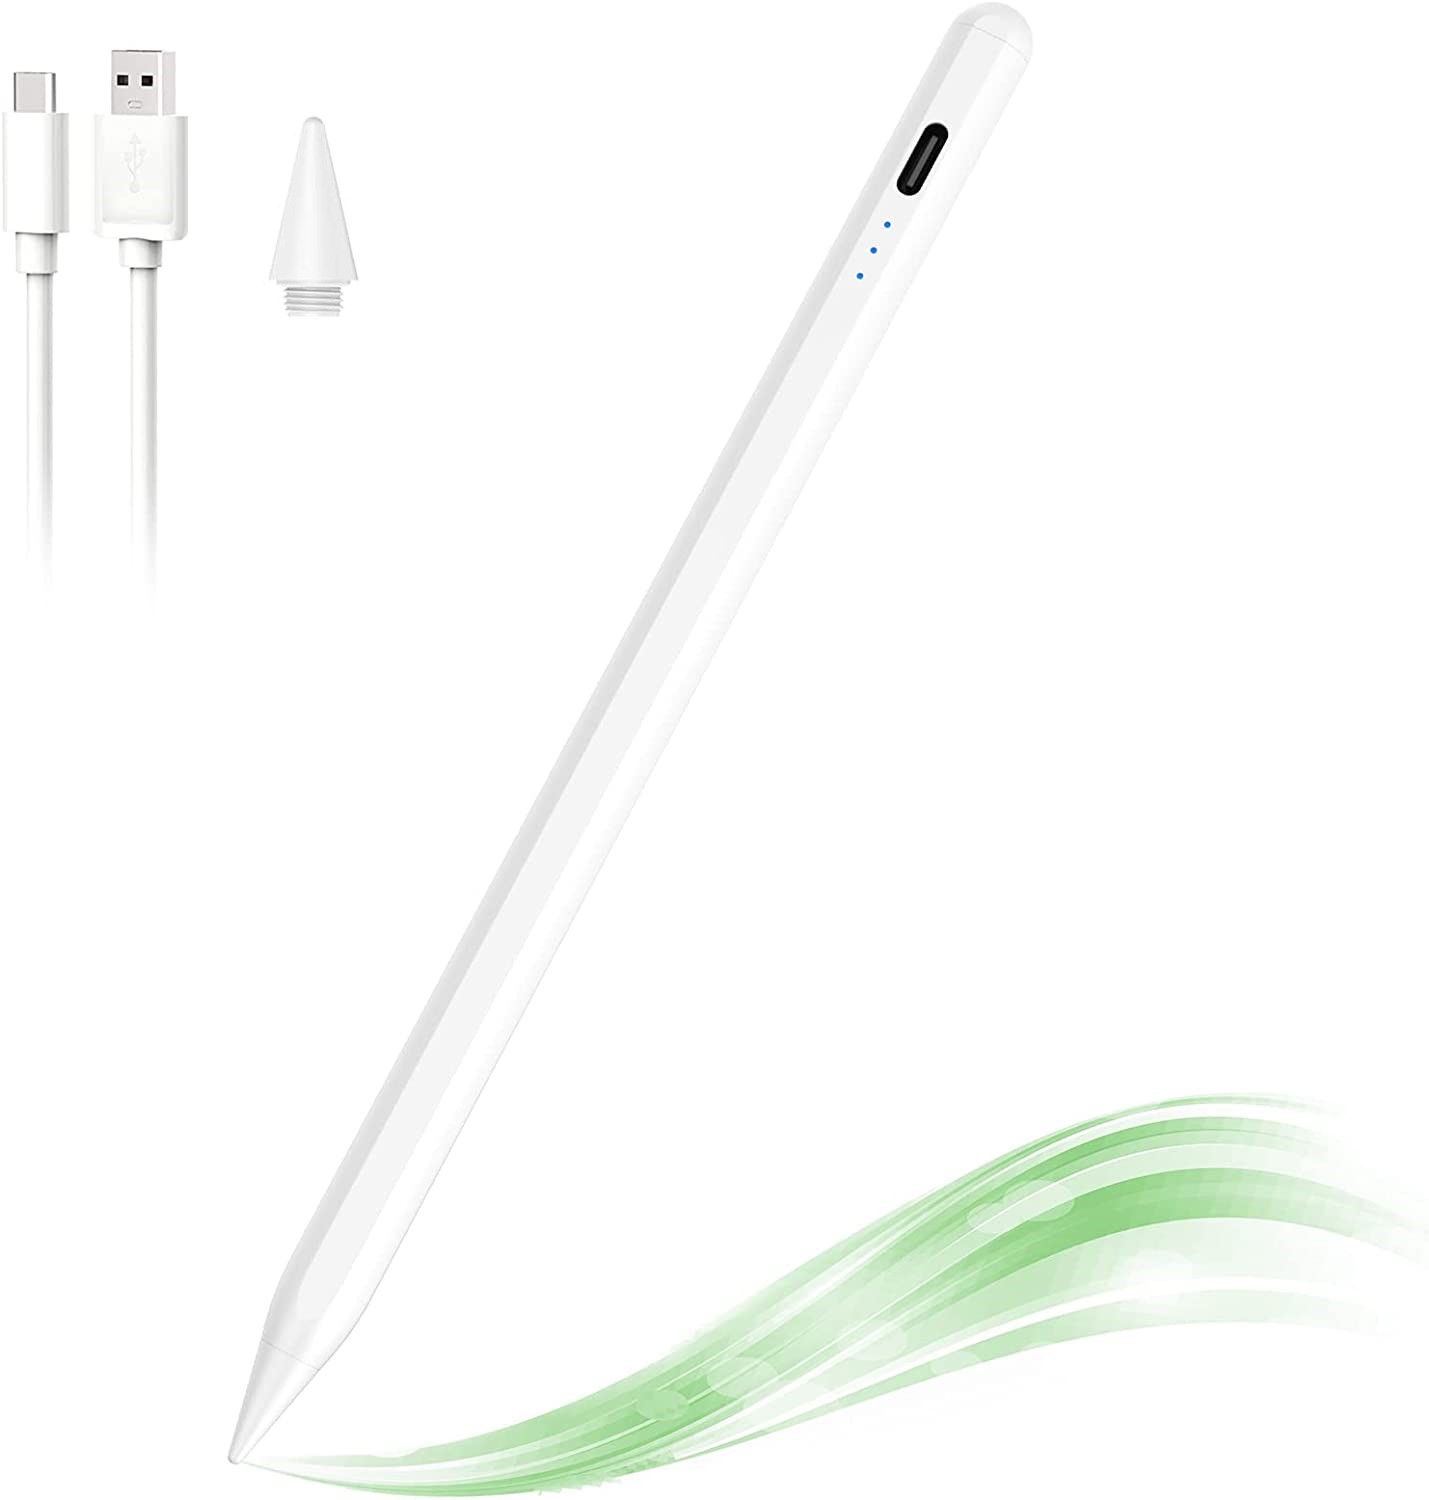 Stylus Pen for iPad with Palm Rejection, Tilt Sensitive and Magnetic Design, Digital Pencil Compatible with 2018 and Later Model(iPad Pro 2021 11/12.9 Inch, iPad 8th Gen, iPad 7/6th, iPad Air 4th/3rd) Featured Image